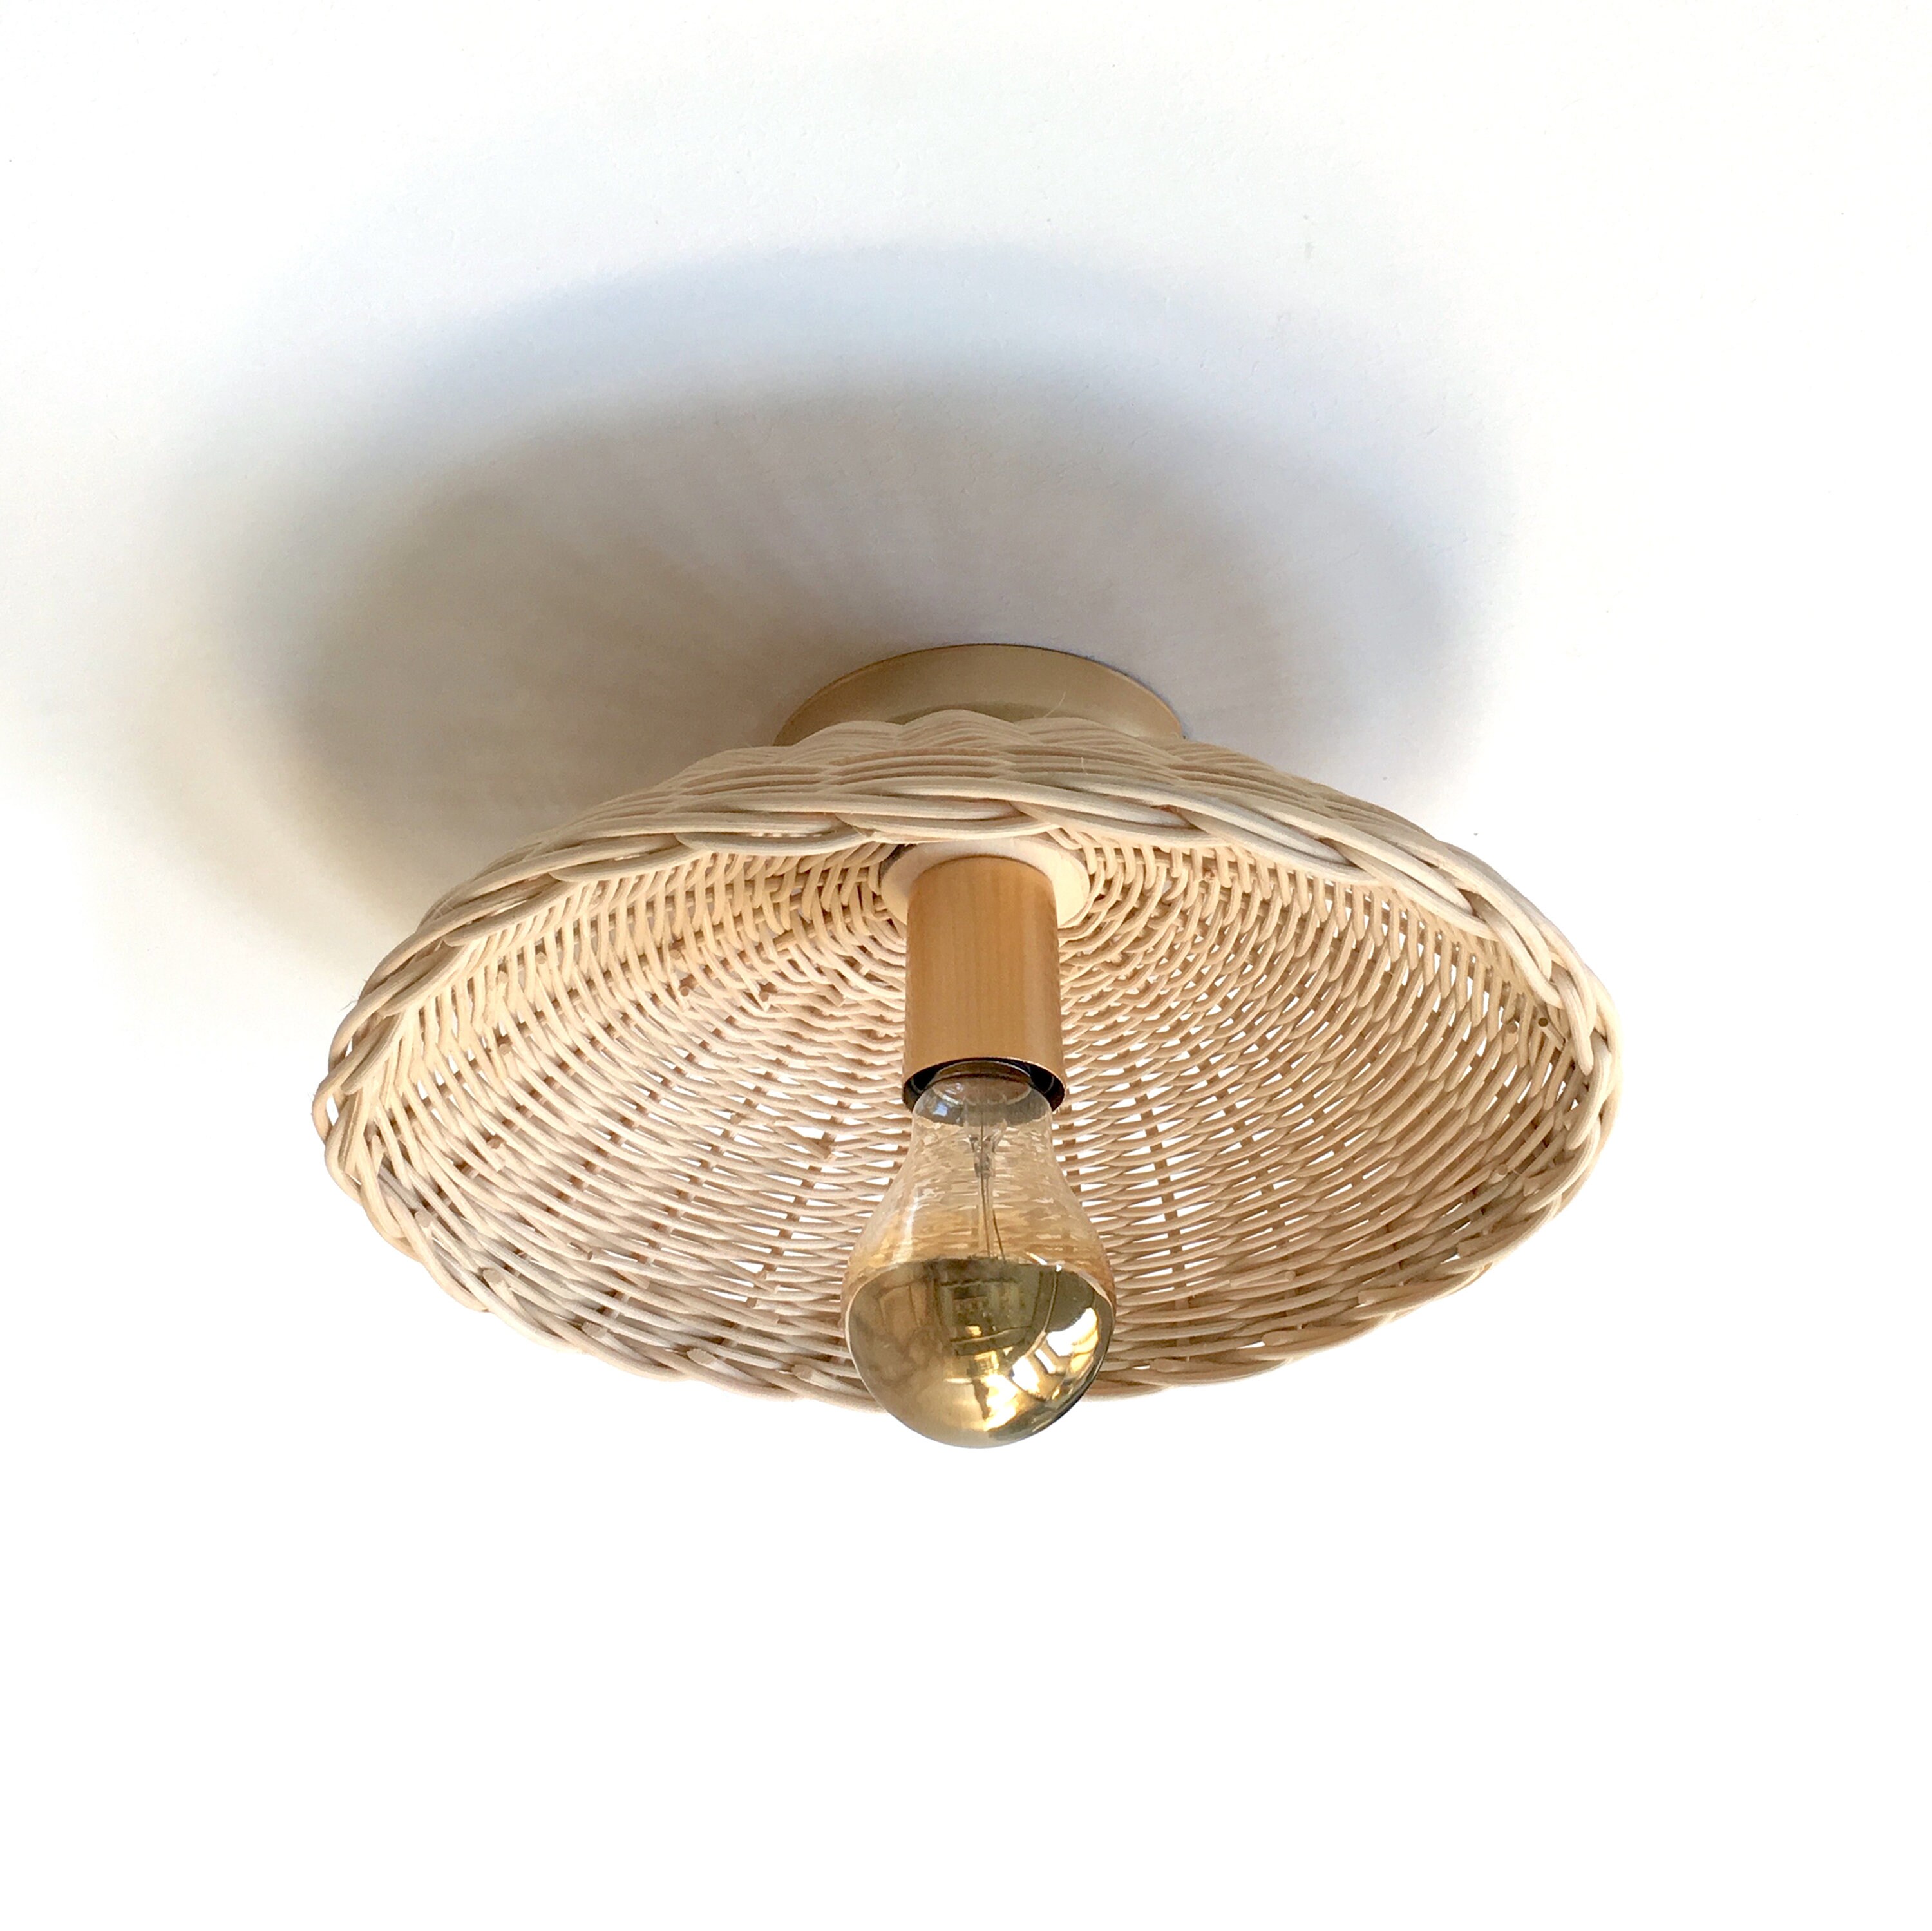 Wood wall sconce Wall sconce Rattan lamp shade Boho wall scone Hanging lights Indoor lights Bamboo pendant light Art deco lamp